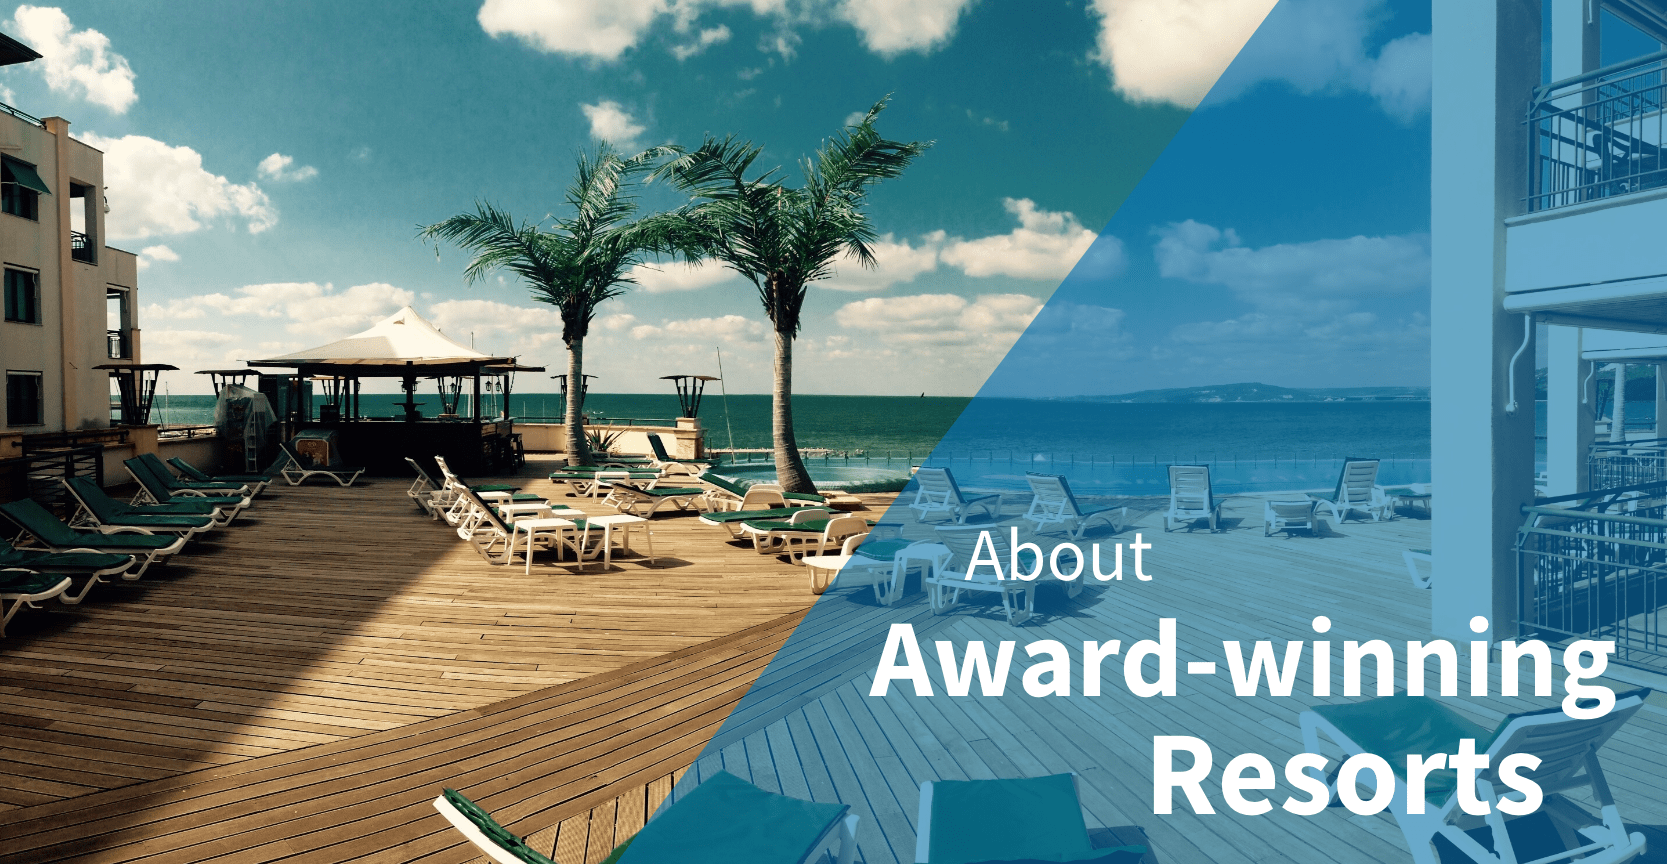 Integrated Cloud Communications Solutions Support Award winning Resorts Banner